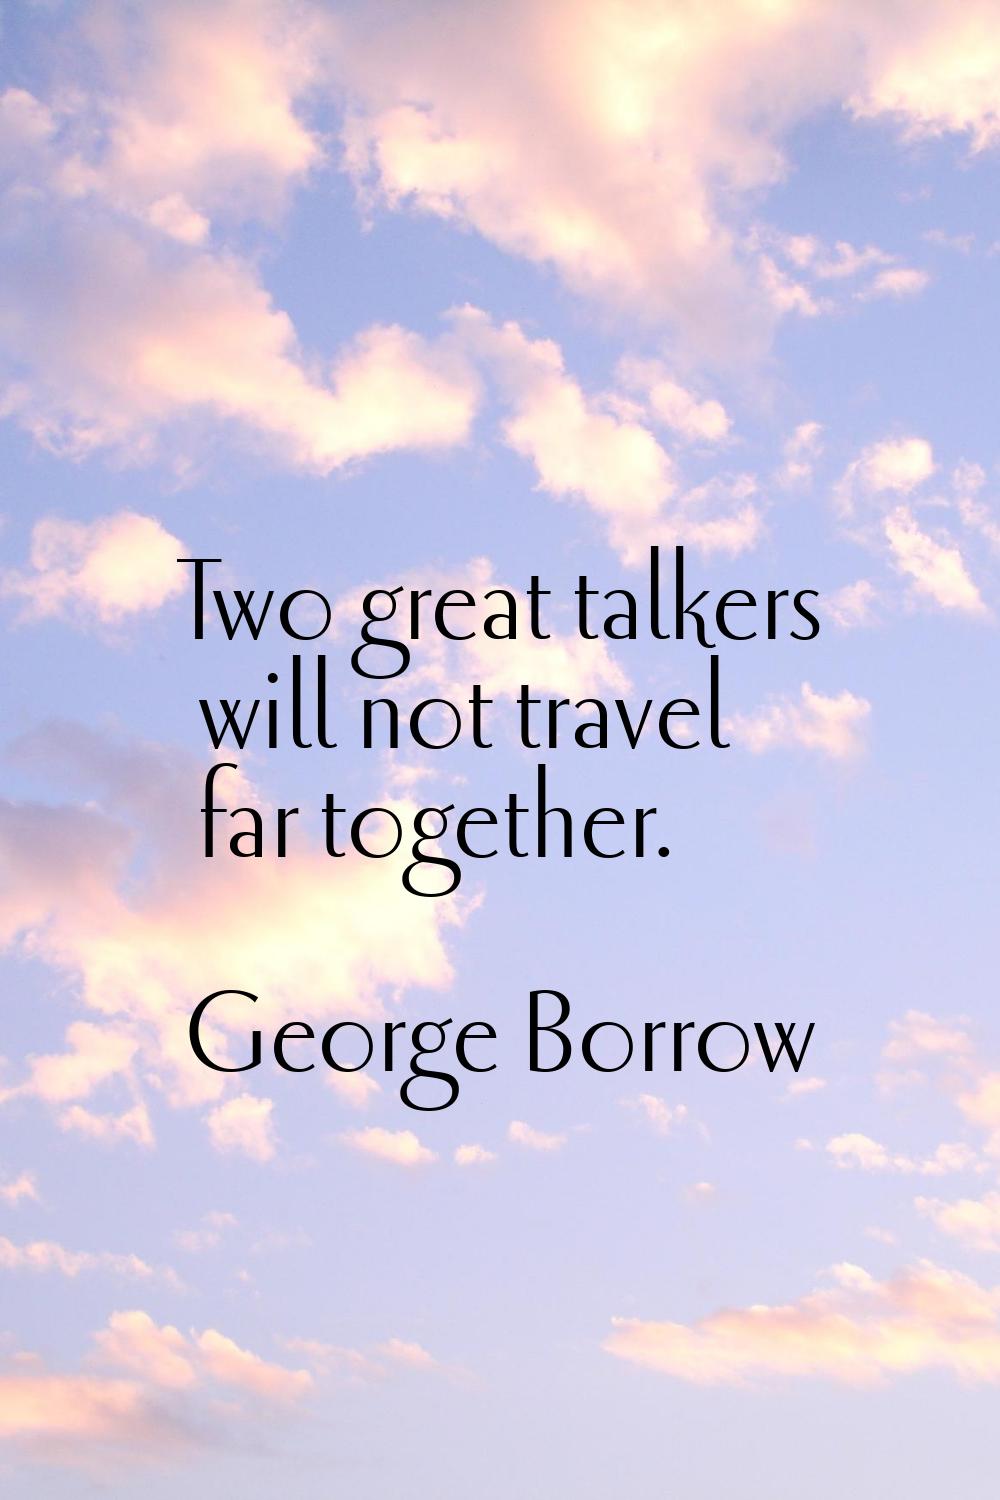 Two great talkers will not travel far together.